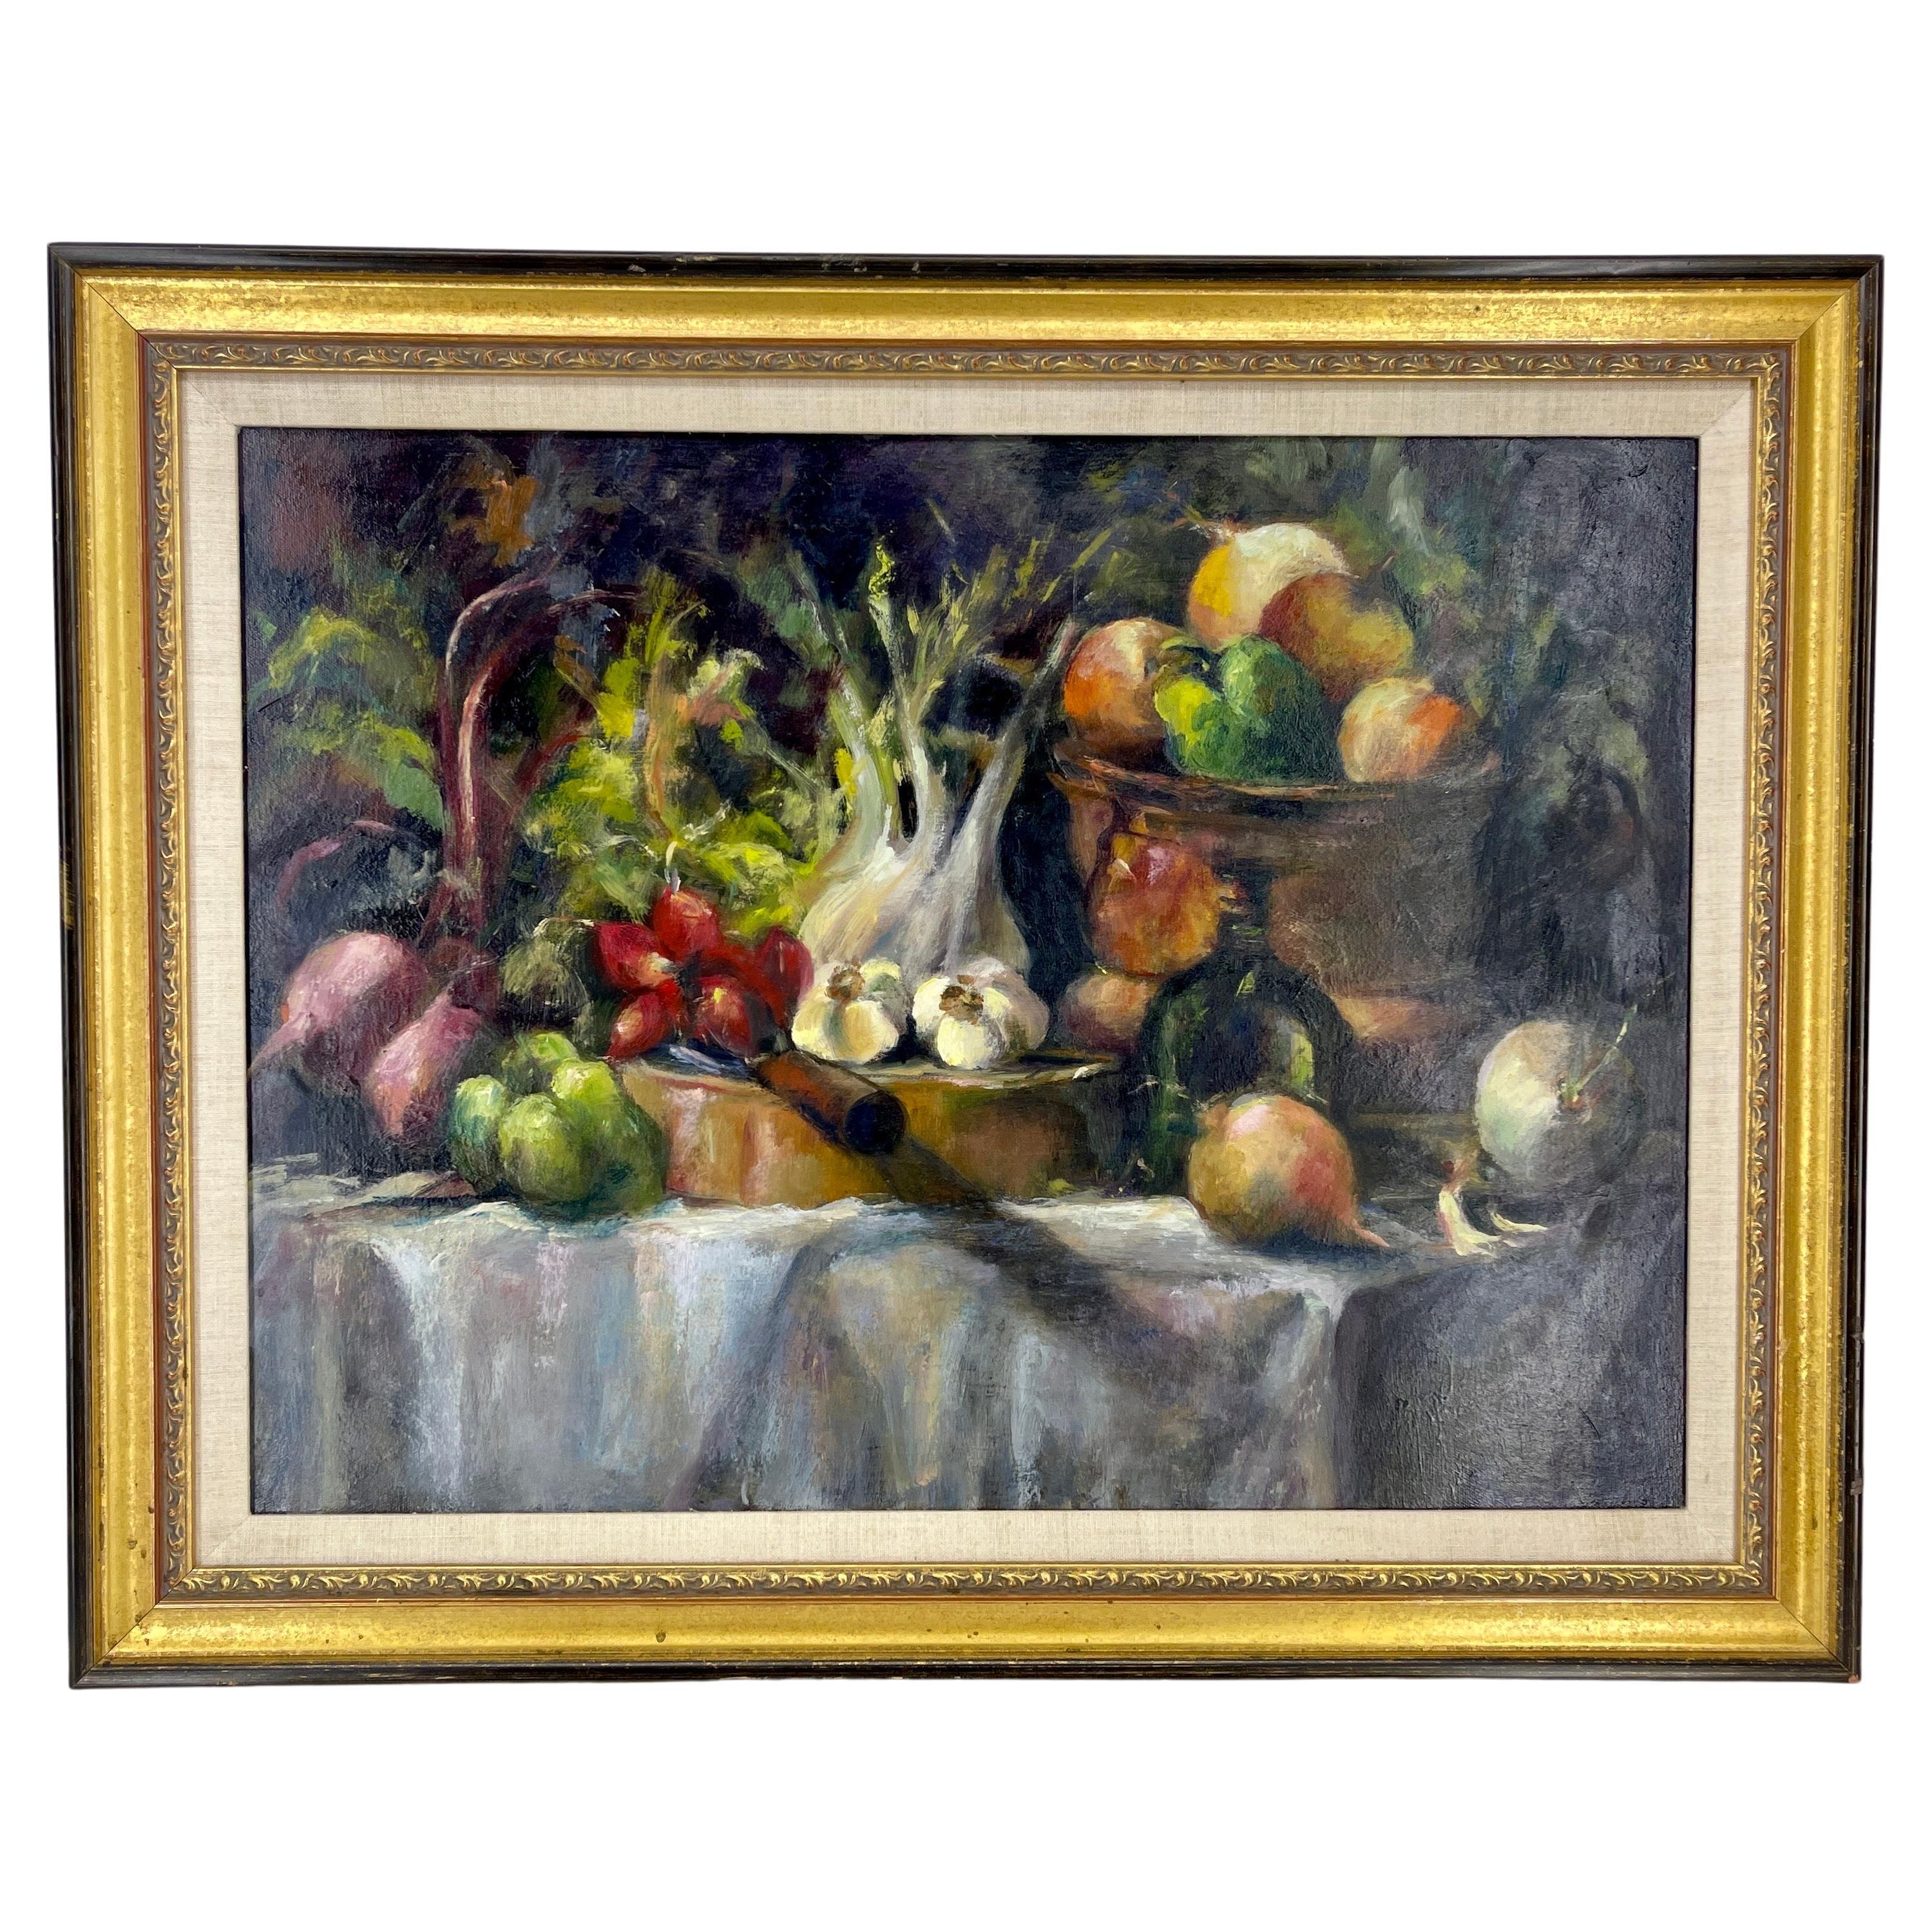 Still Life Framed Oil Painting on Canvas with Variety of Vegetables, France

20th Century Still Life painting featuring an abundance of vegetables on a table draped casually with a white tablecloth. Onions with red and green peppers can be seen